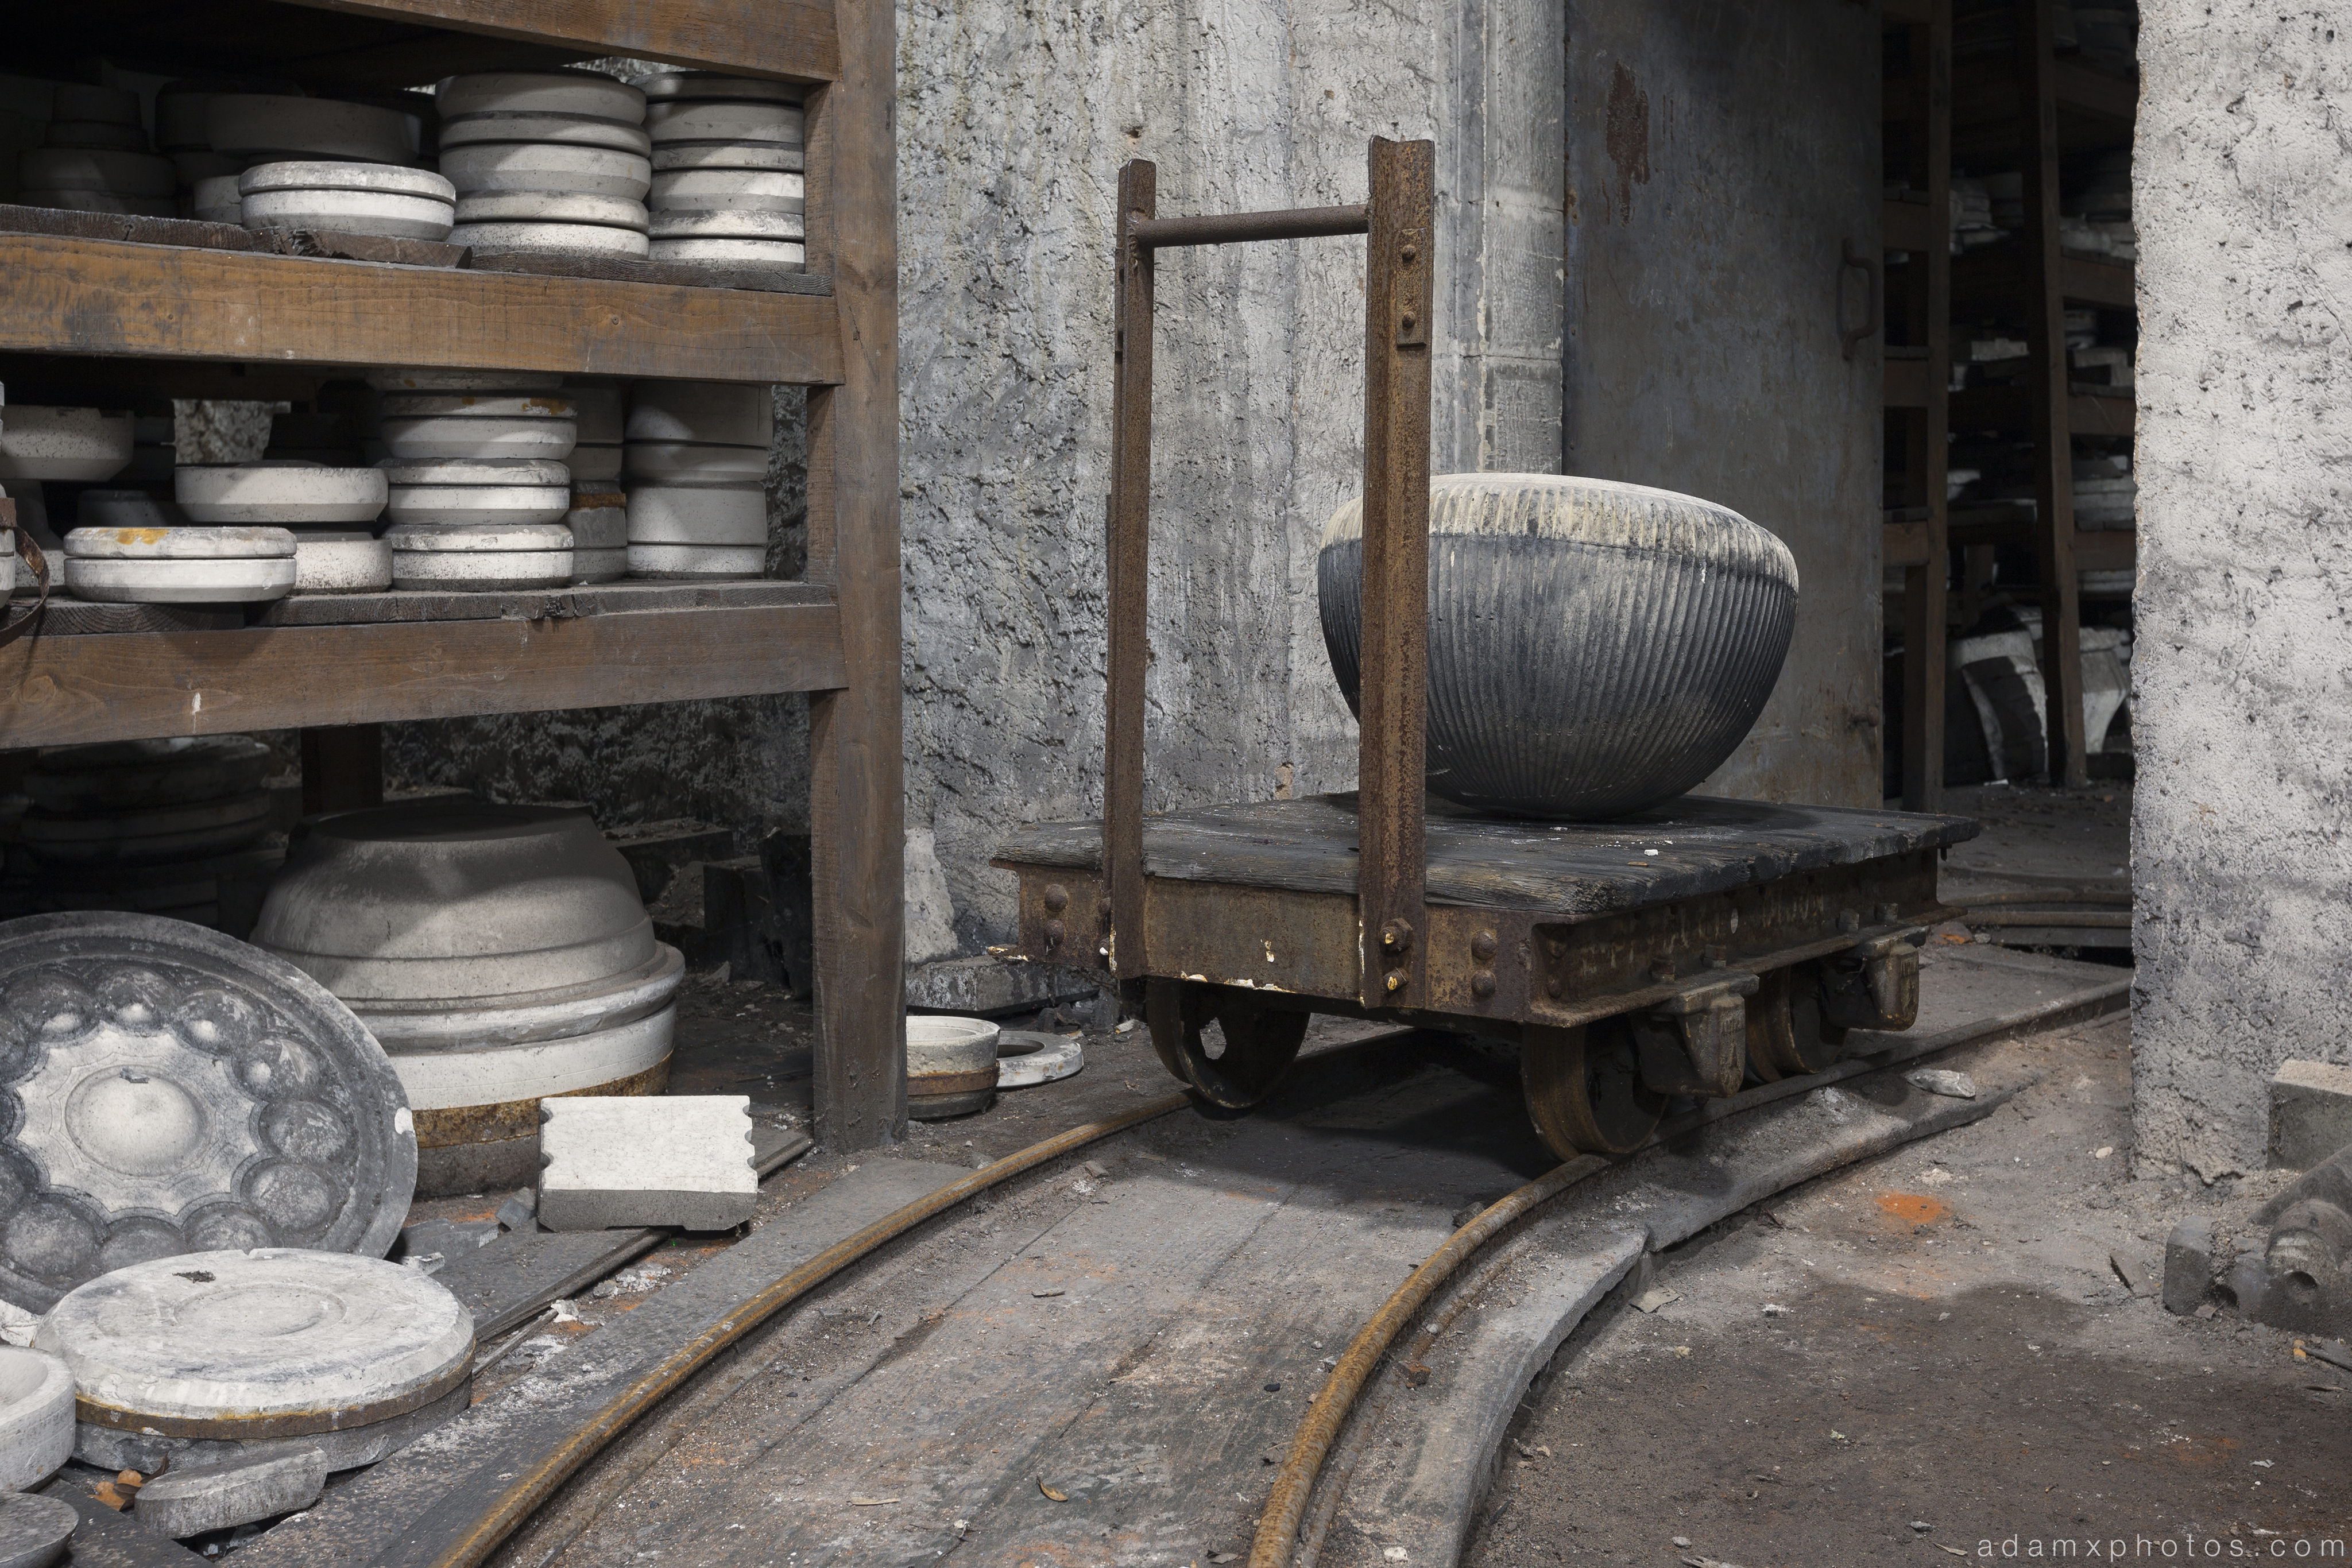 Faiencerie S Poterie S trolley cart bowls Poterie DGM Urbex Pottery ceramics ceramic factory France Adam X Urban Exploration Access 2016 Abandoned decay lost forgotten derelict location